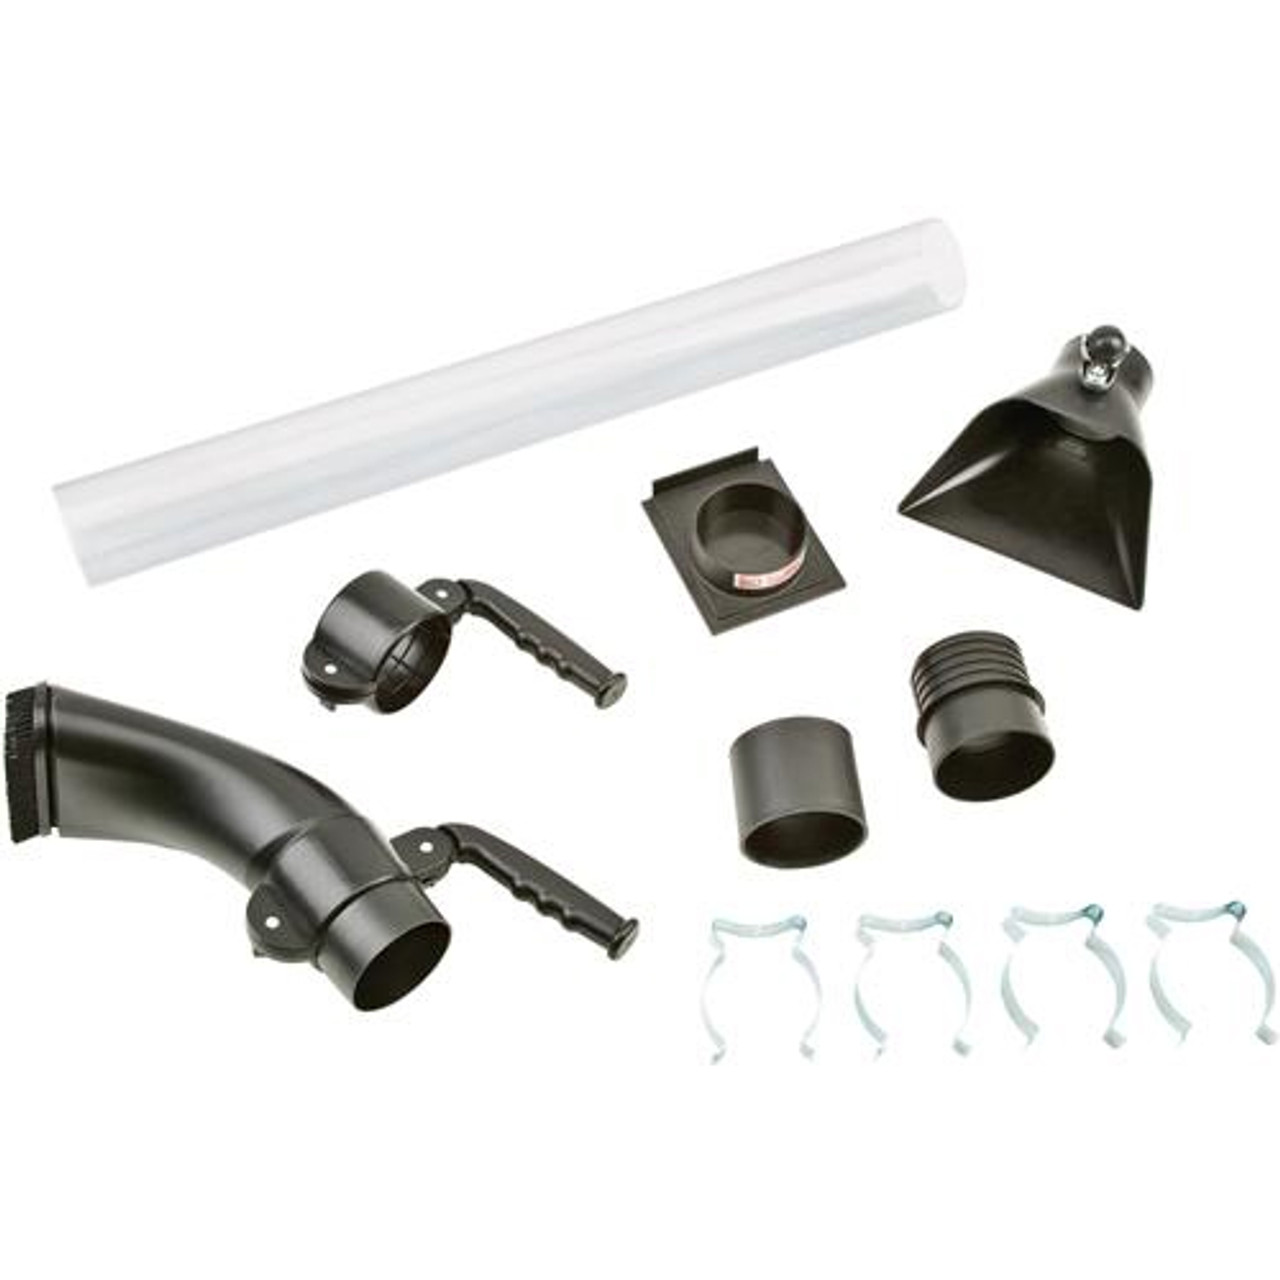 Dust Collection Pick Up Accessories Kit